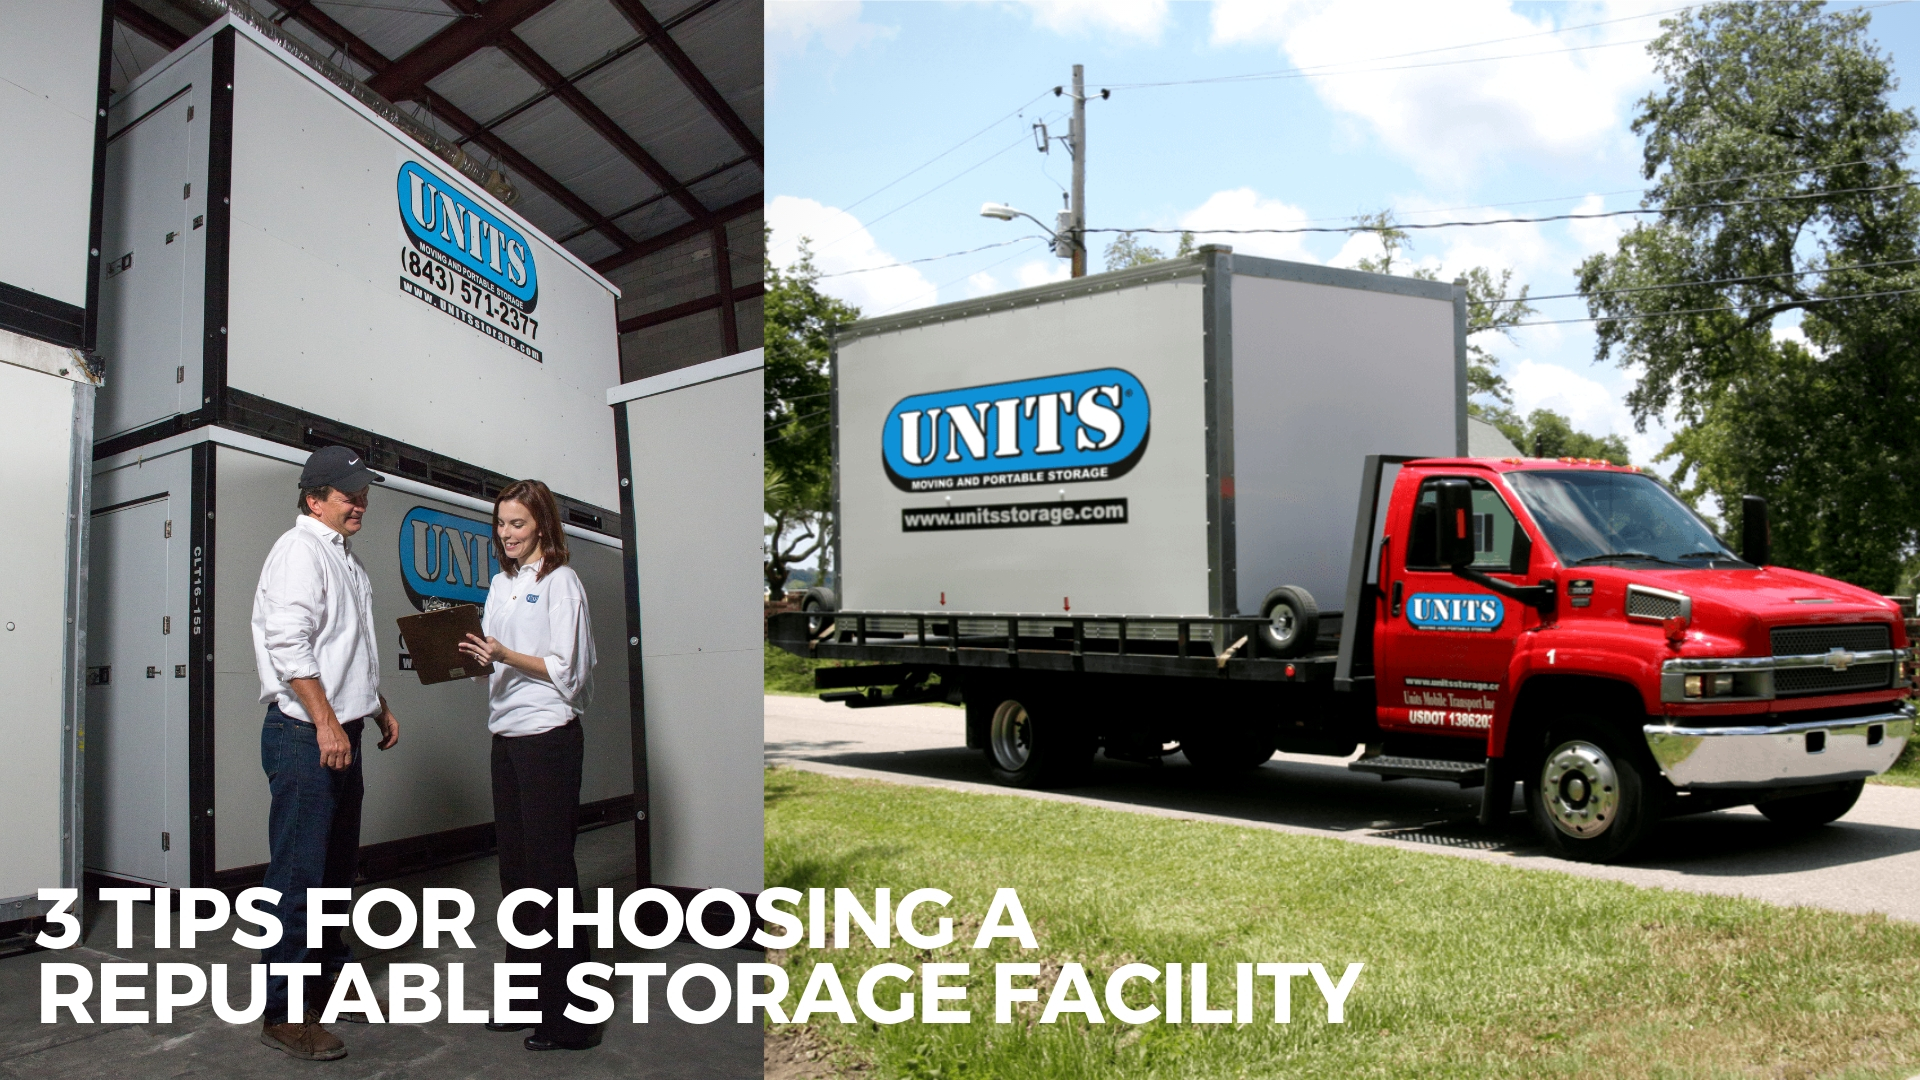 3 Tips For Choosing A Reputable Storage Facility